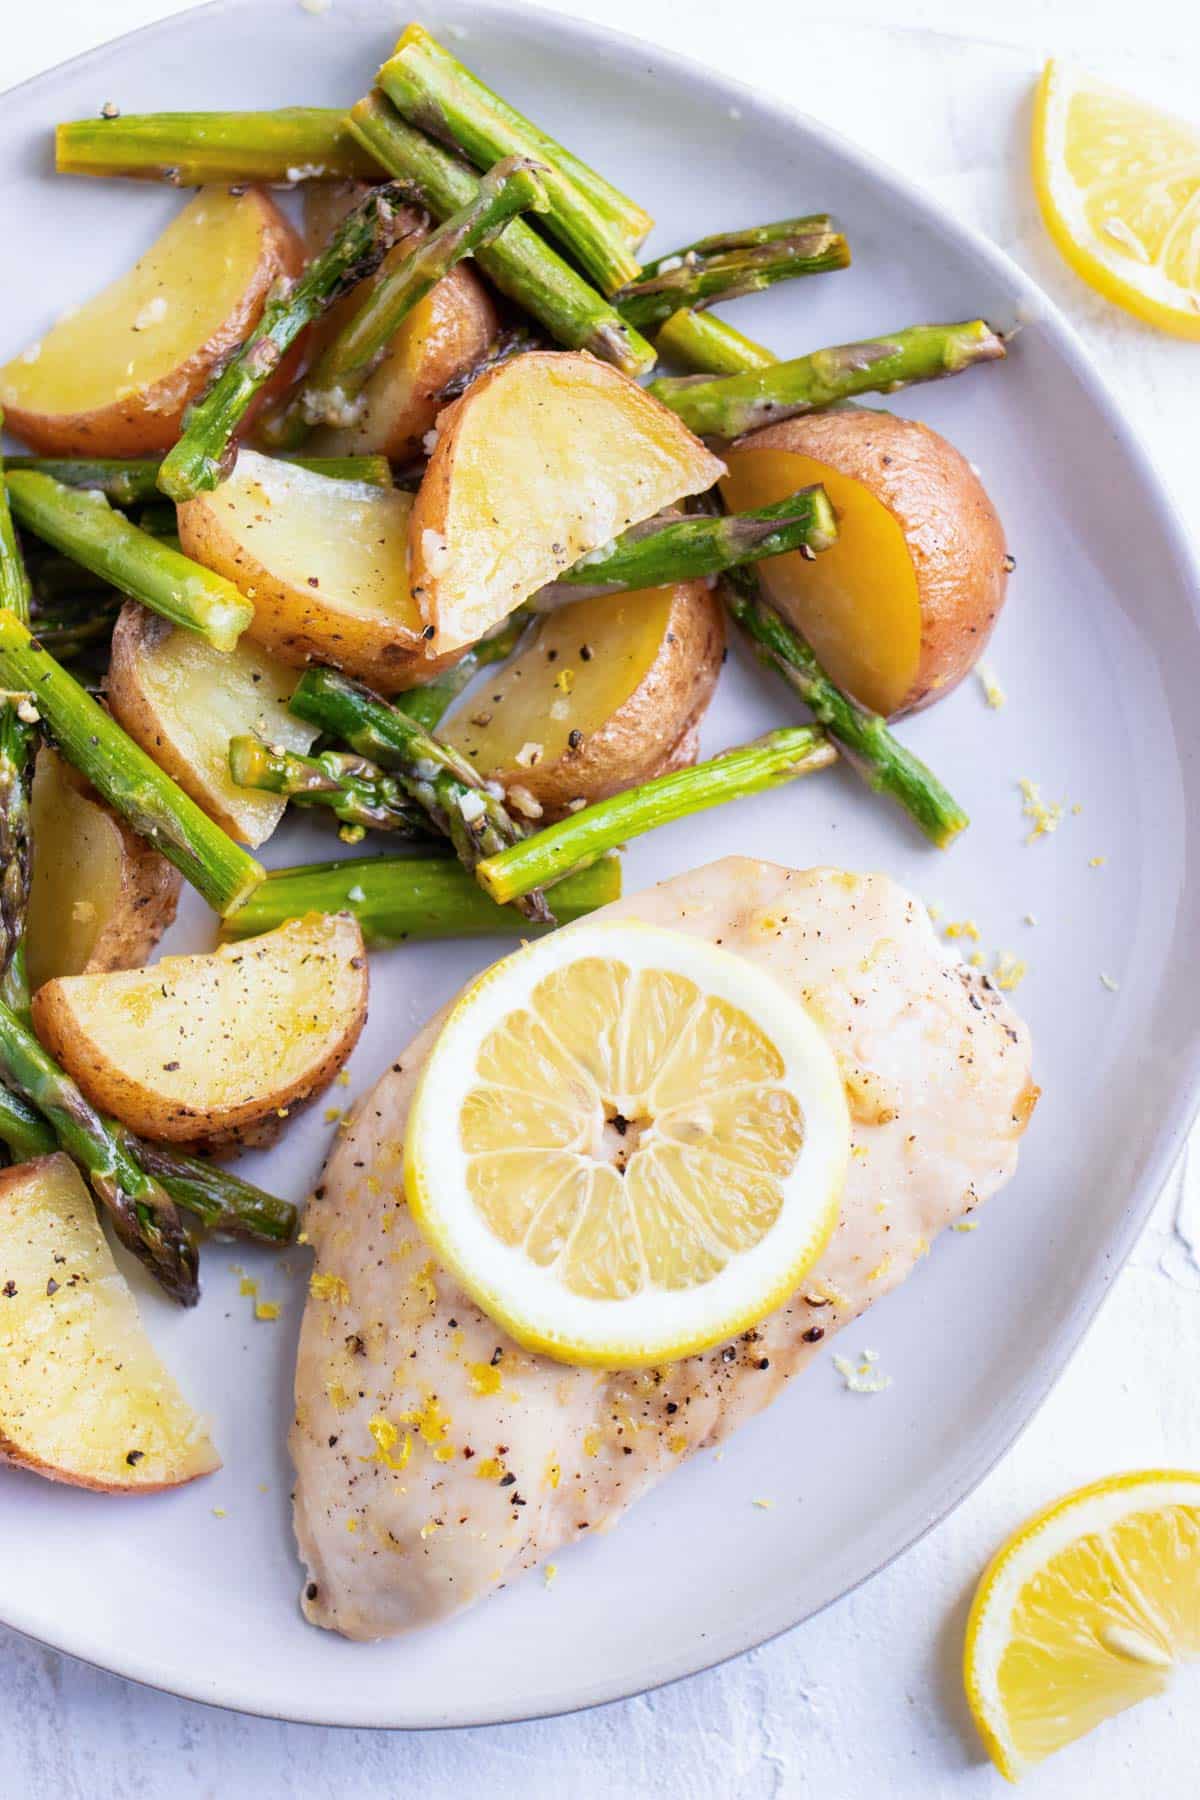 A single chicken breast with a lemon slice on top next to potato wedges and asparagus.